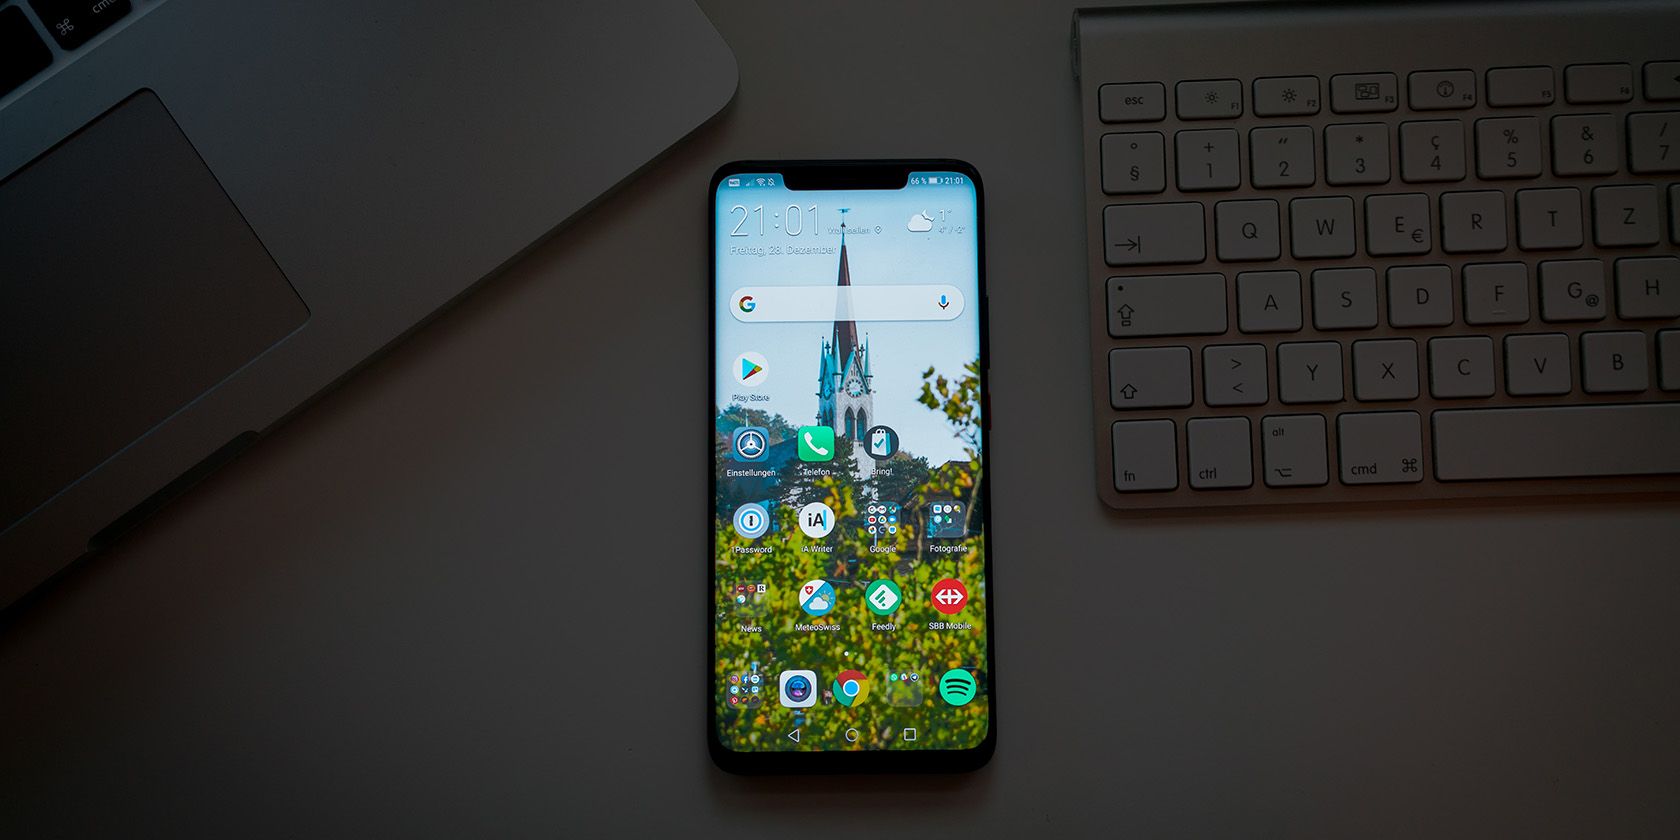 How to Use a Video as a Wallpaper on Your Android Phone